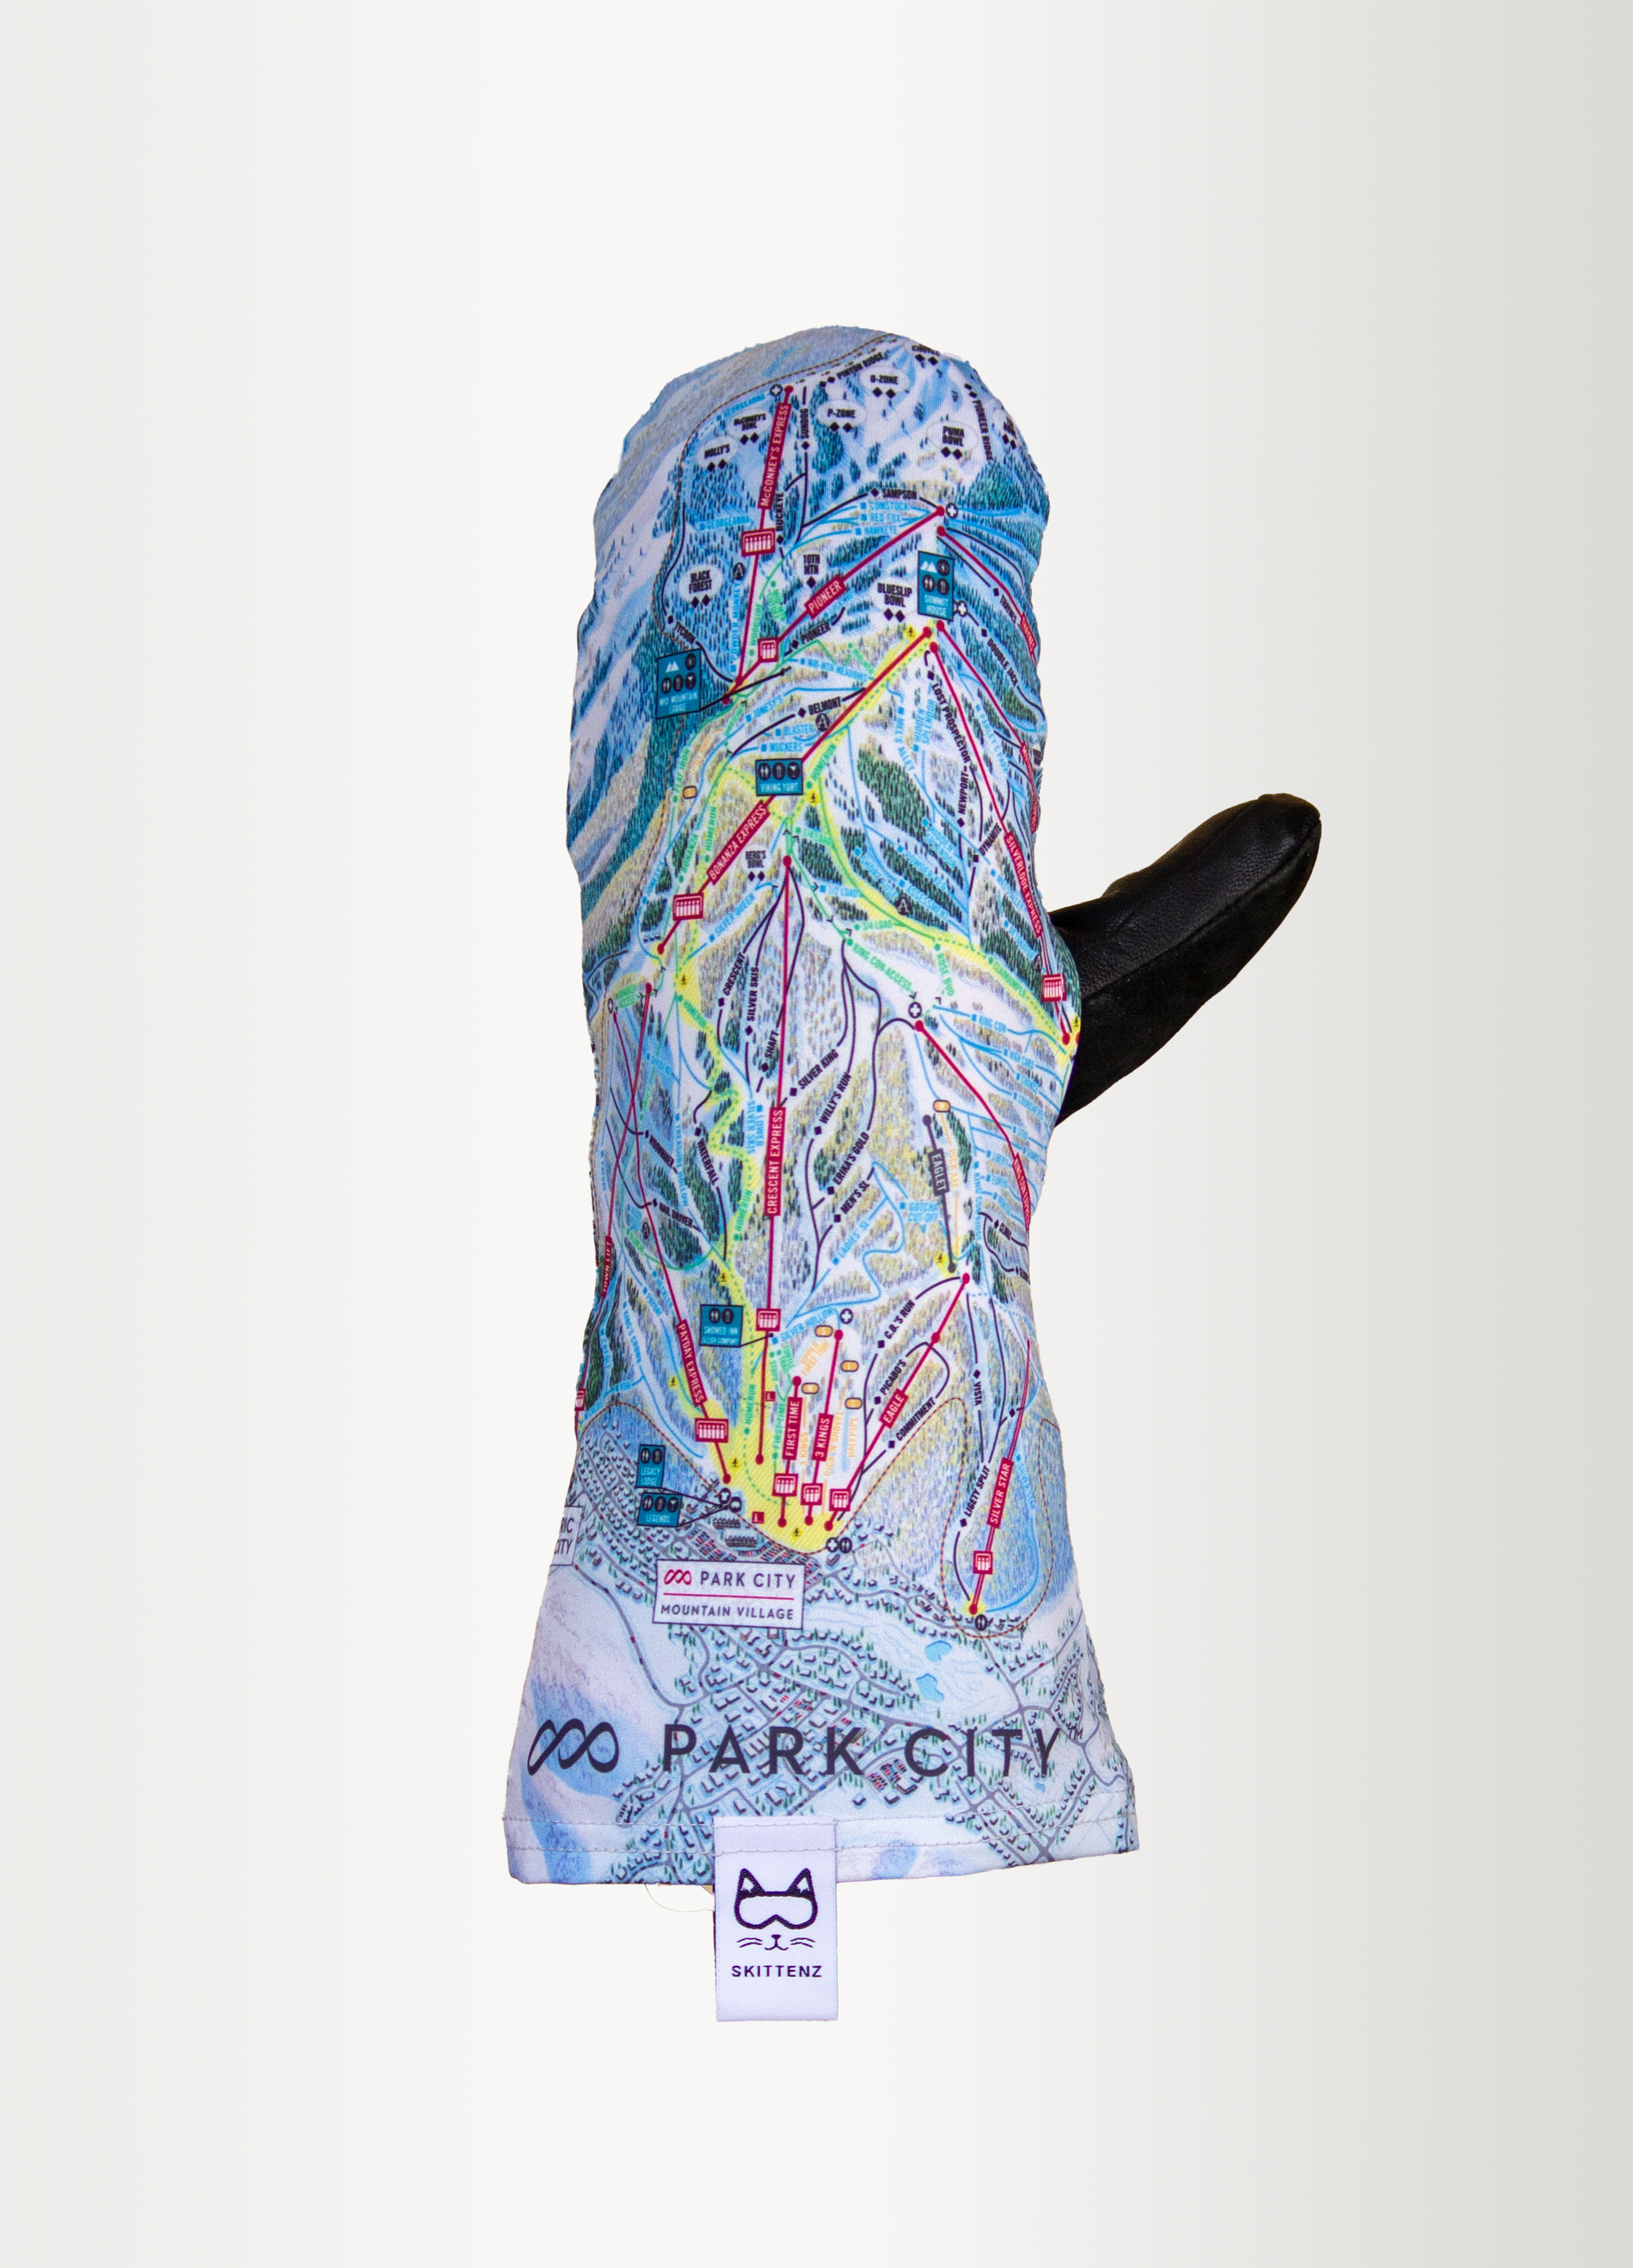 Park City Ski or Snowboard Trail Map Skins for Mittens or Gloves